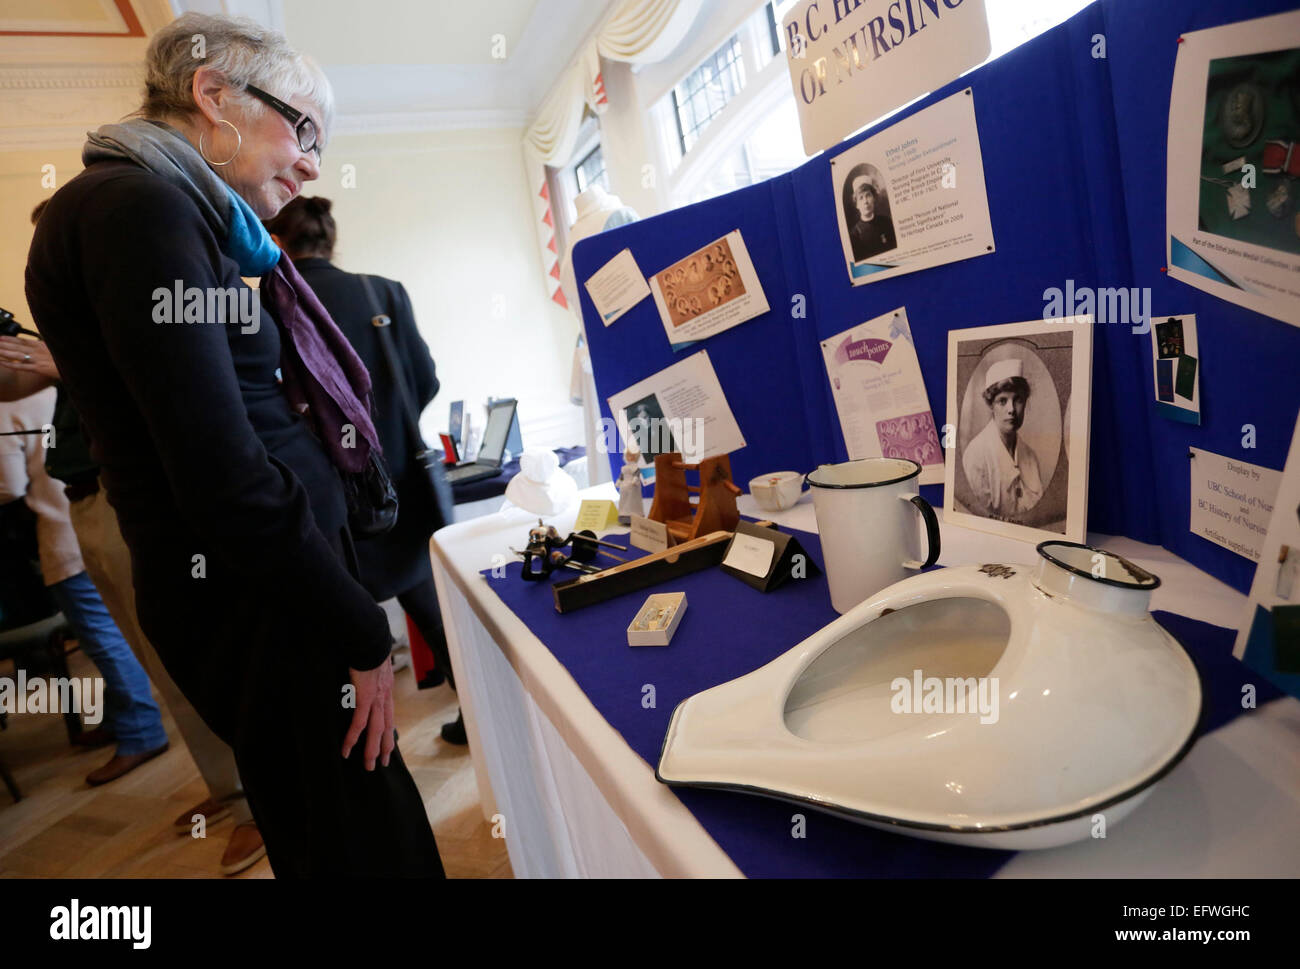 (150211) -- VANCOUVER, Feb. 11, 2015 (Xinhua) -- A visitor looks at some historic nursing tools during the nursing school celebration event at University of British Columbia in Richmond, Canada, Feb. 10, 2015. In honour of the Canadian nursing pioneer Ethel Johns (1879-1968) named as National Historic Person of Canada, the School of Nursing in University of British Columbia held an event displaying the former nursing uniforms and historic nursing tools during the World War I to commemorate her contribution. Ethel Johns established the first university degree nursing program in Canada at the Un Stock Photo